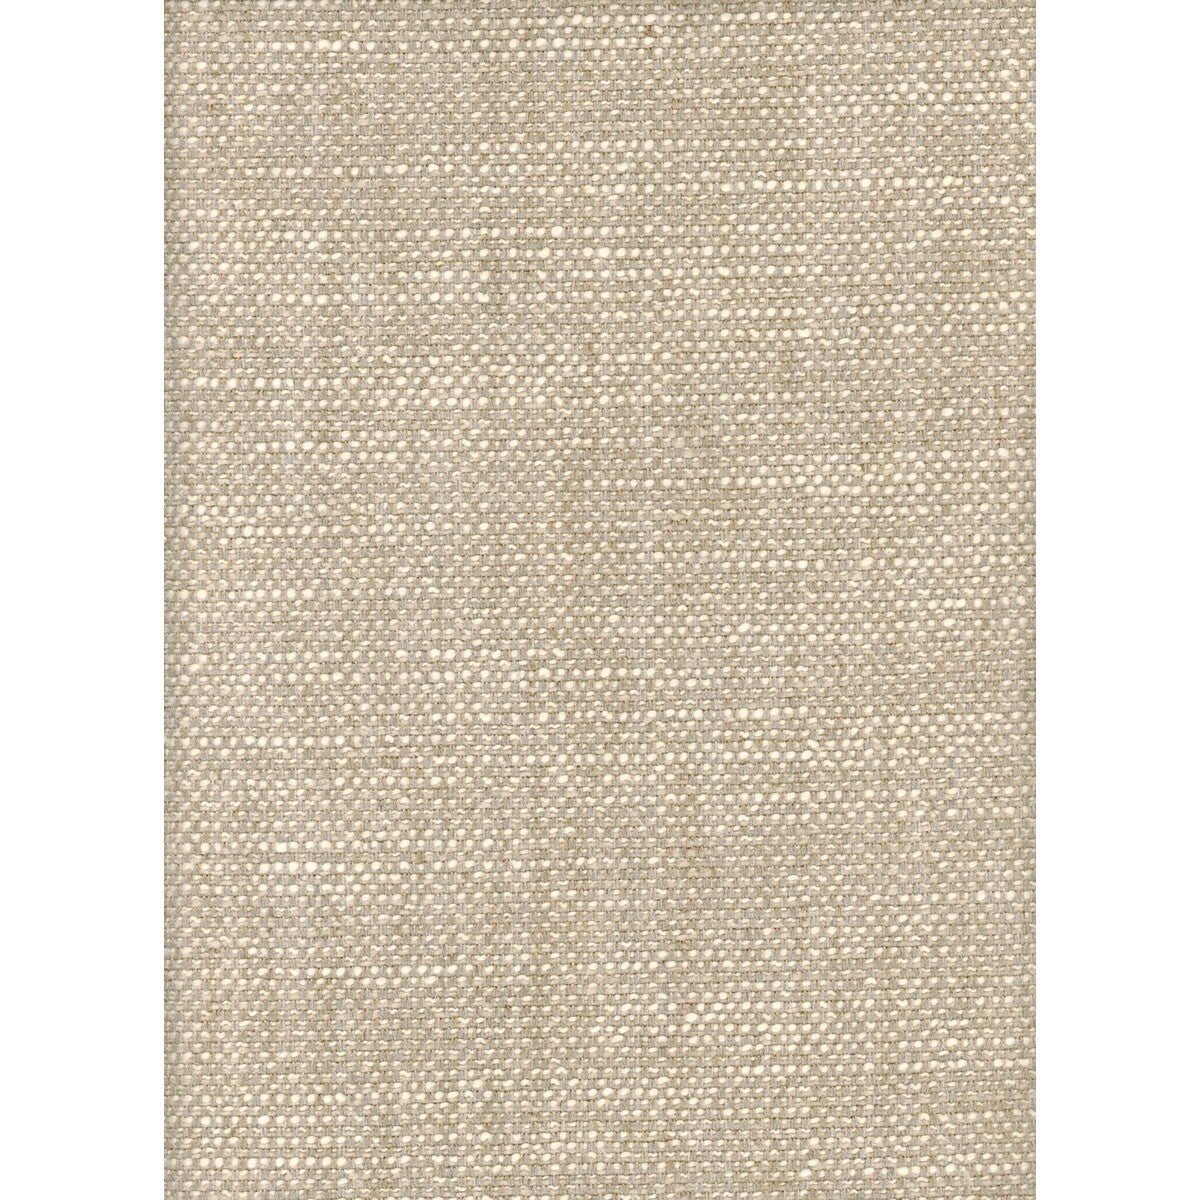 Paraggi fabric in oat color - pattern AM100299.1611.0 - by Kravet Couture in the Andrew Martin Portofino collection